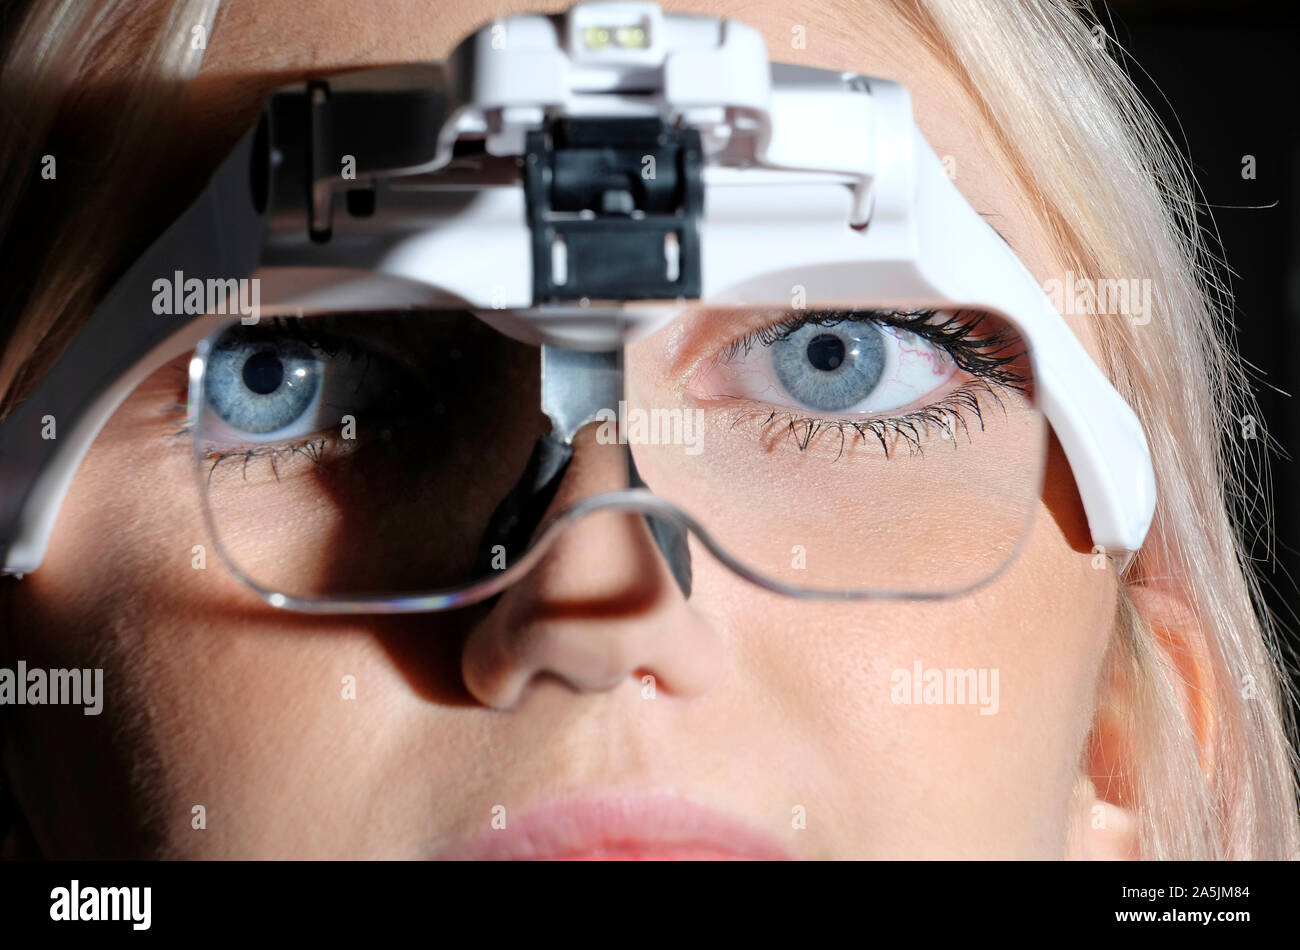 young female person using magnifying glasses headset Stock Photo